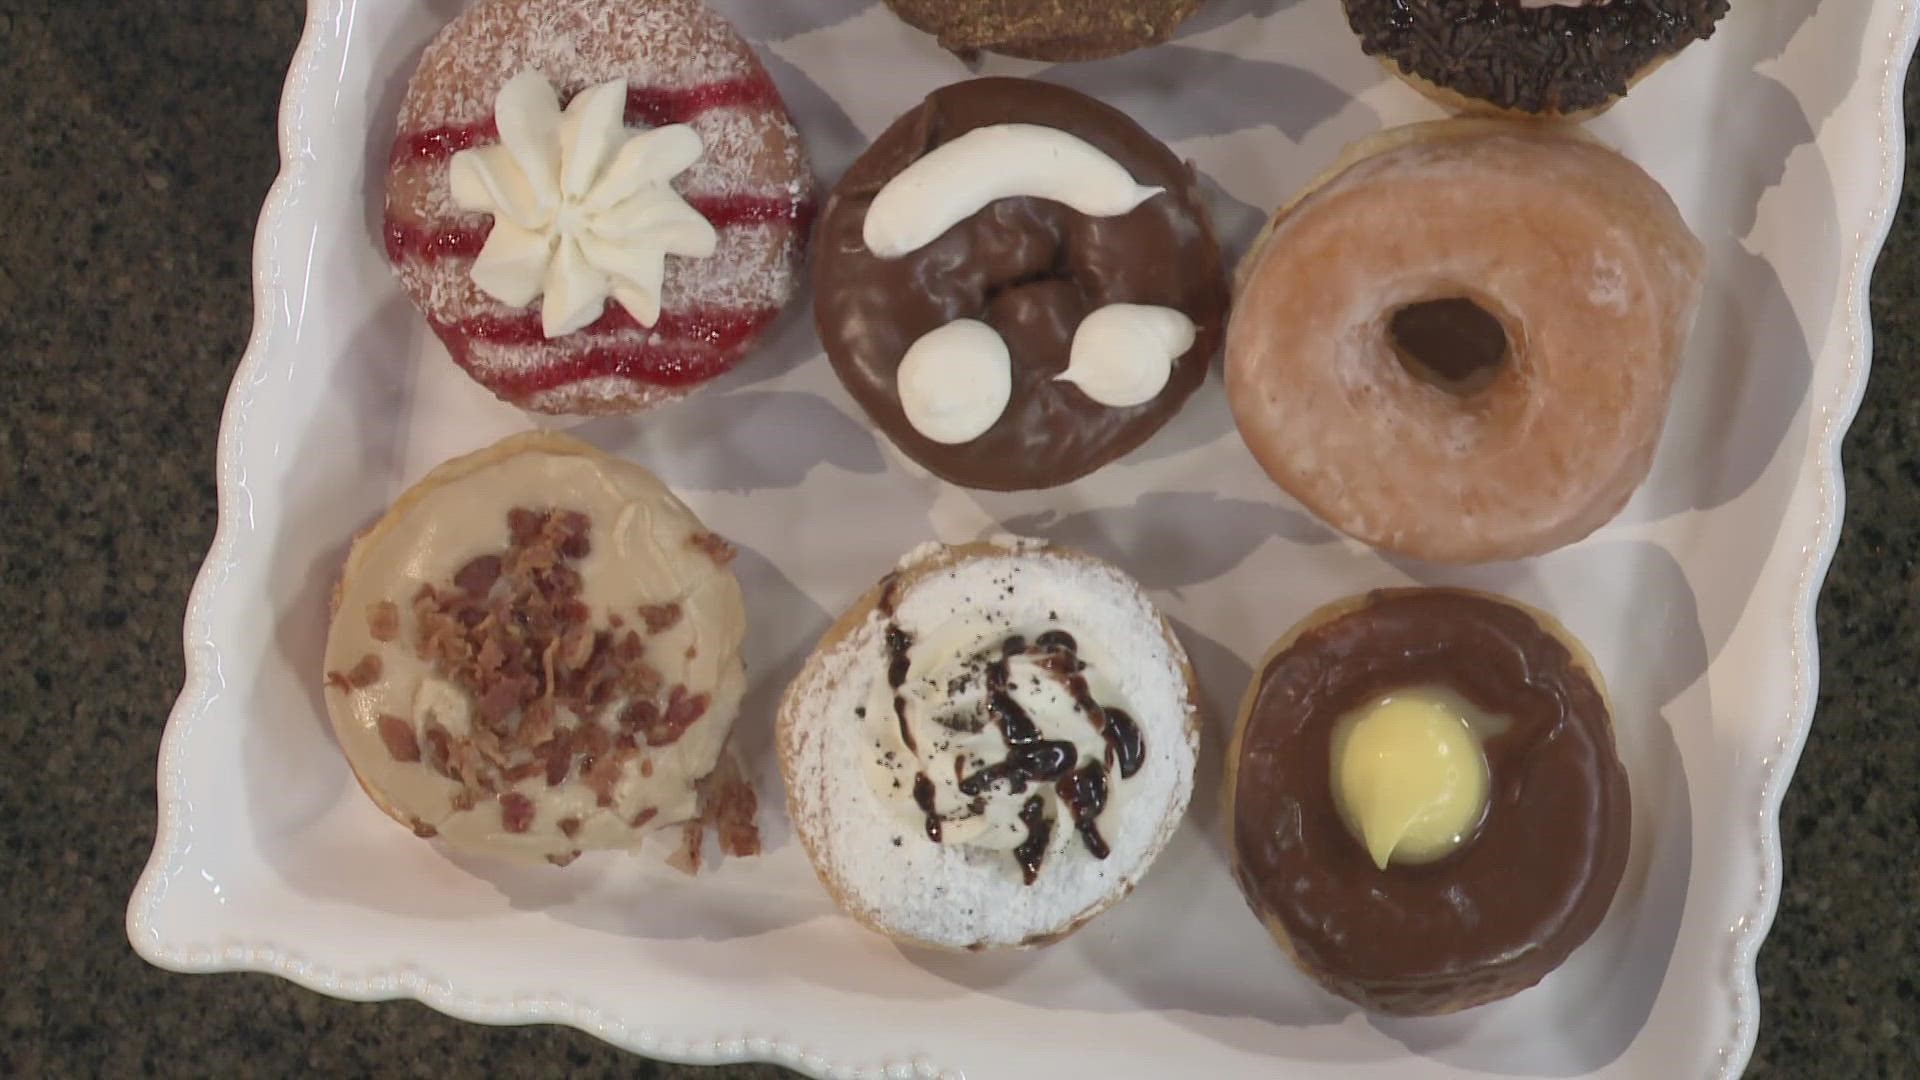 3News' Kierra Cotton talked with a spokesperson about their brand new location at West Side Market. Jack Frost Donuts has everything to offer.